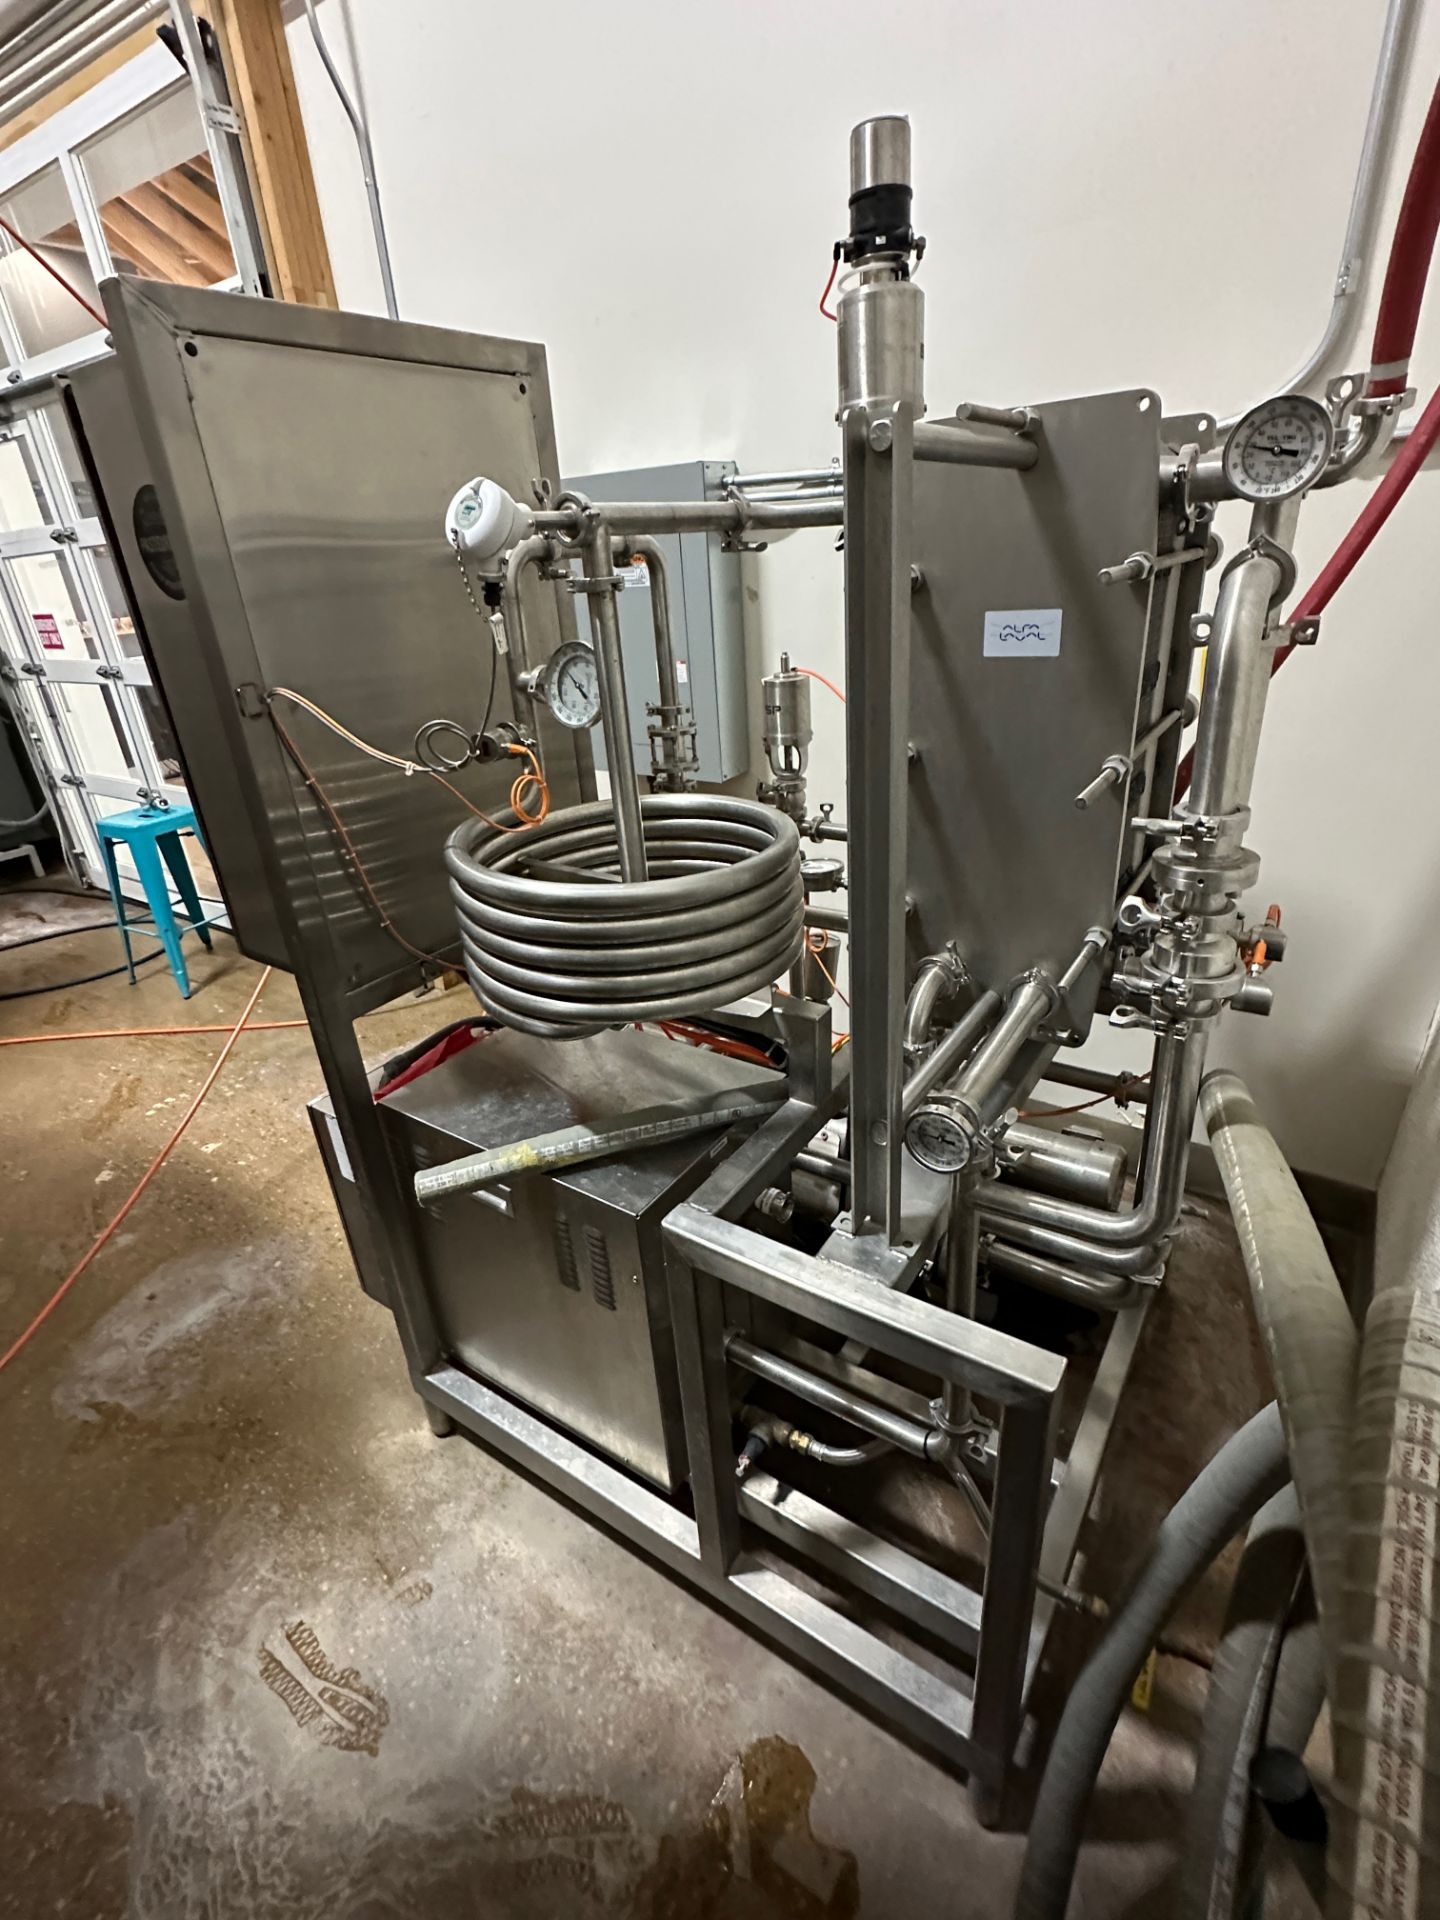 2019 Goodnature CBP 300 Pasteurizer Skid with Alfa Laval Heat Exchanger, Stainless | Rig Fee $350 - Image 3 of 5